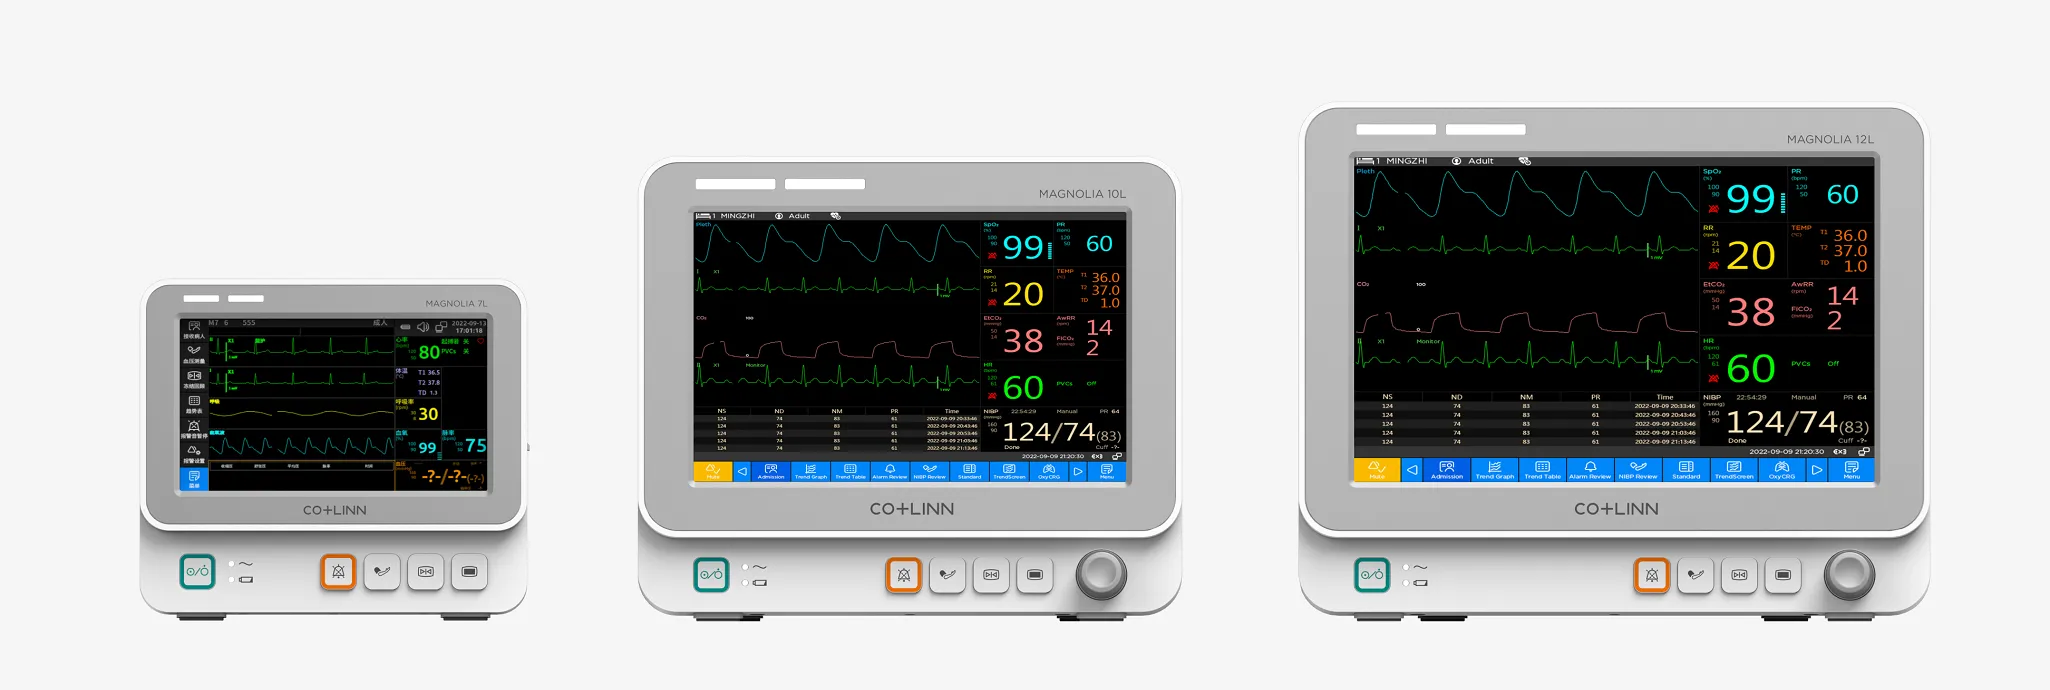 patient monitor, anesthesia monitor, central monitoring system, acute care smart monitoring, medical AI